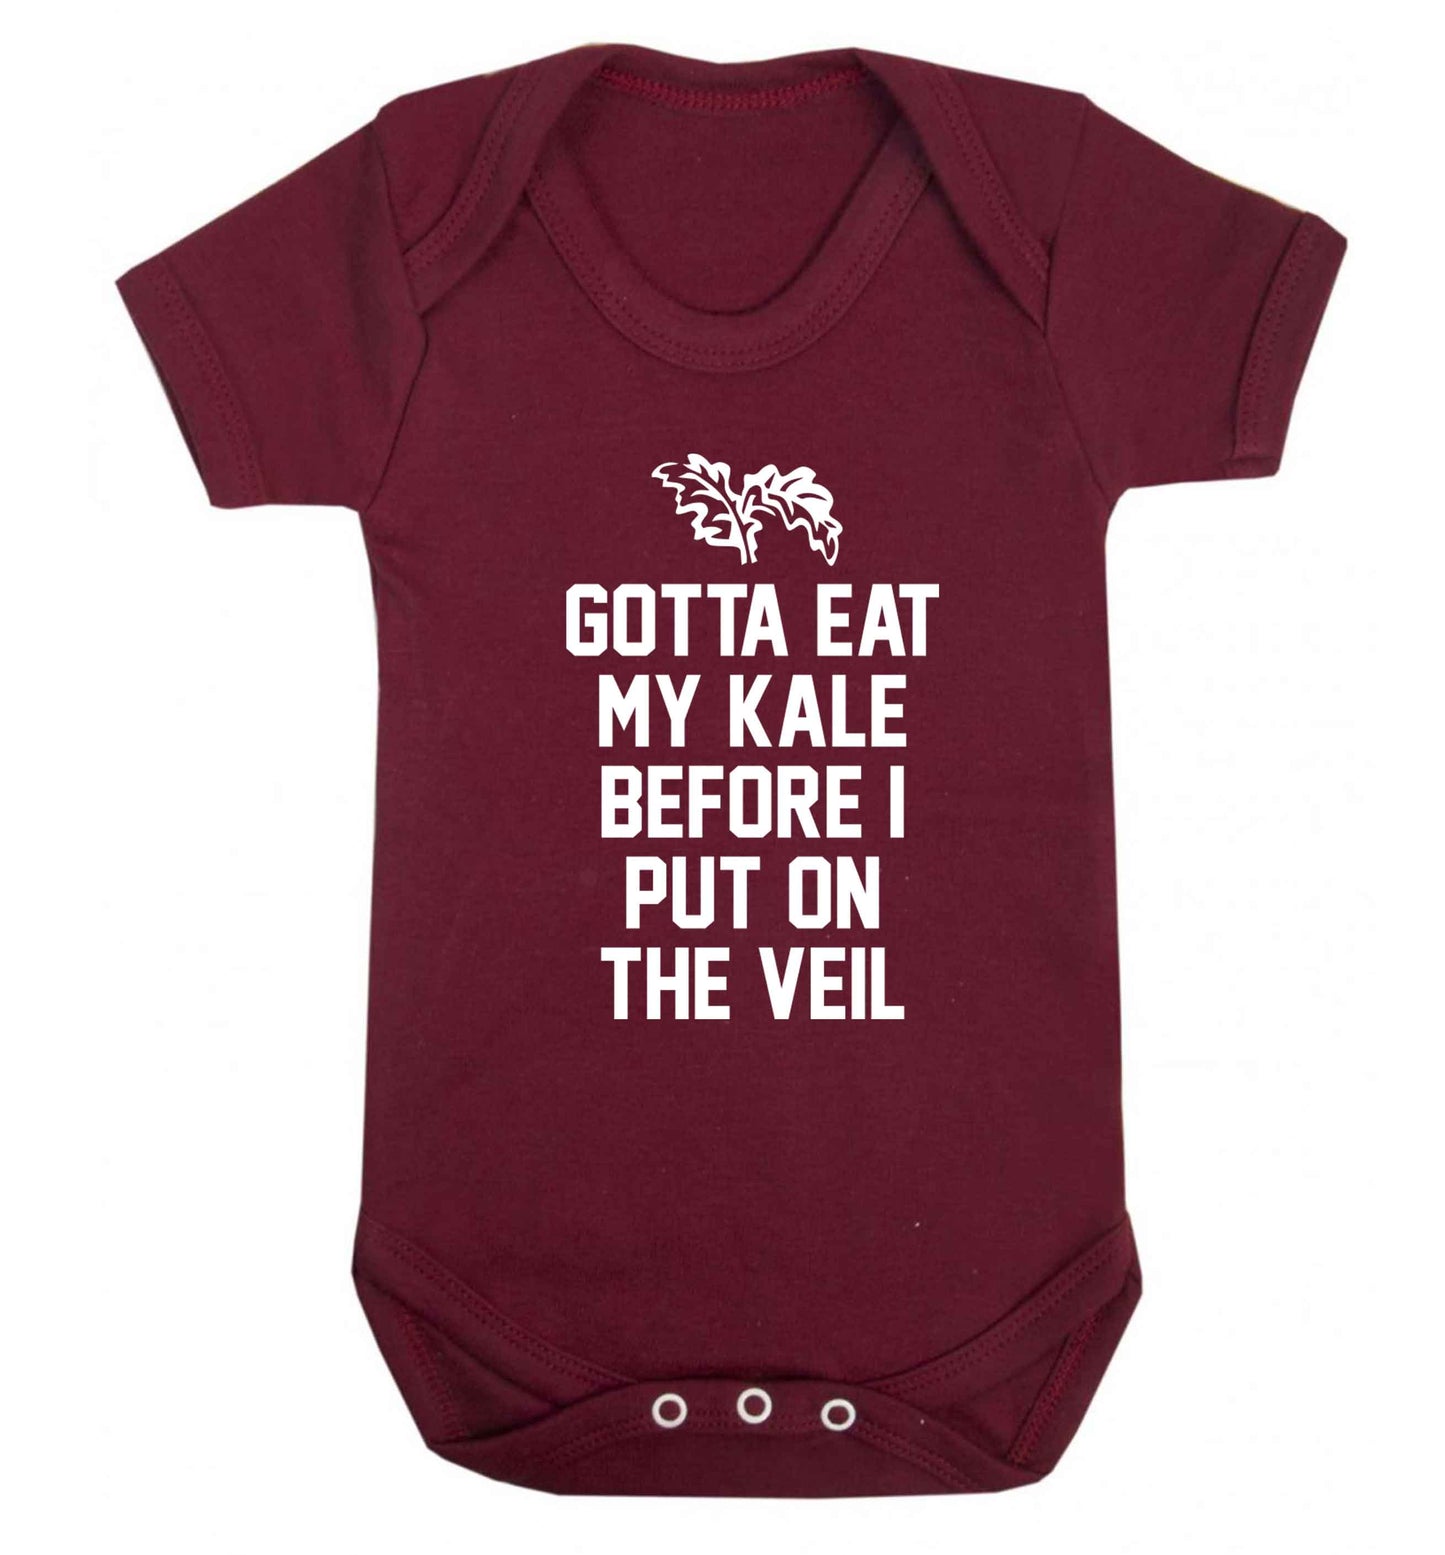 Gotta eat my kale before I put on the veil Baby Vest maroon 18-24 months